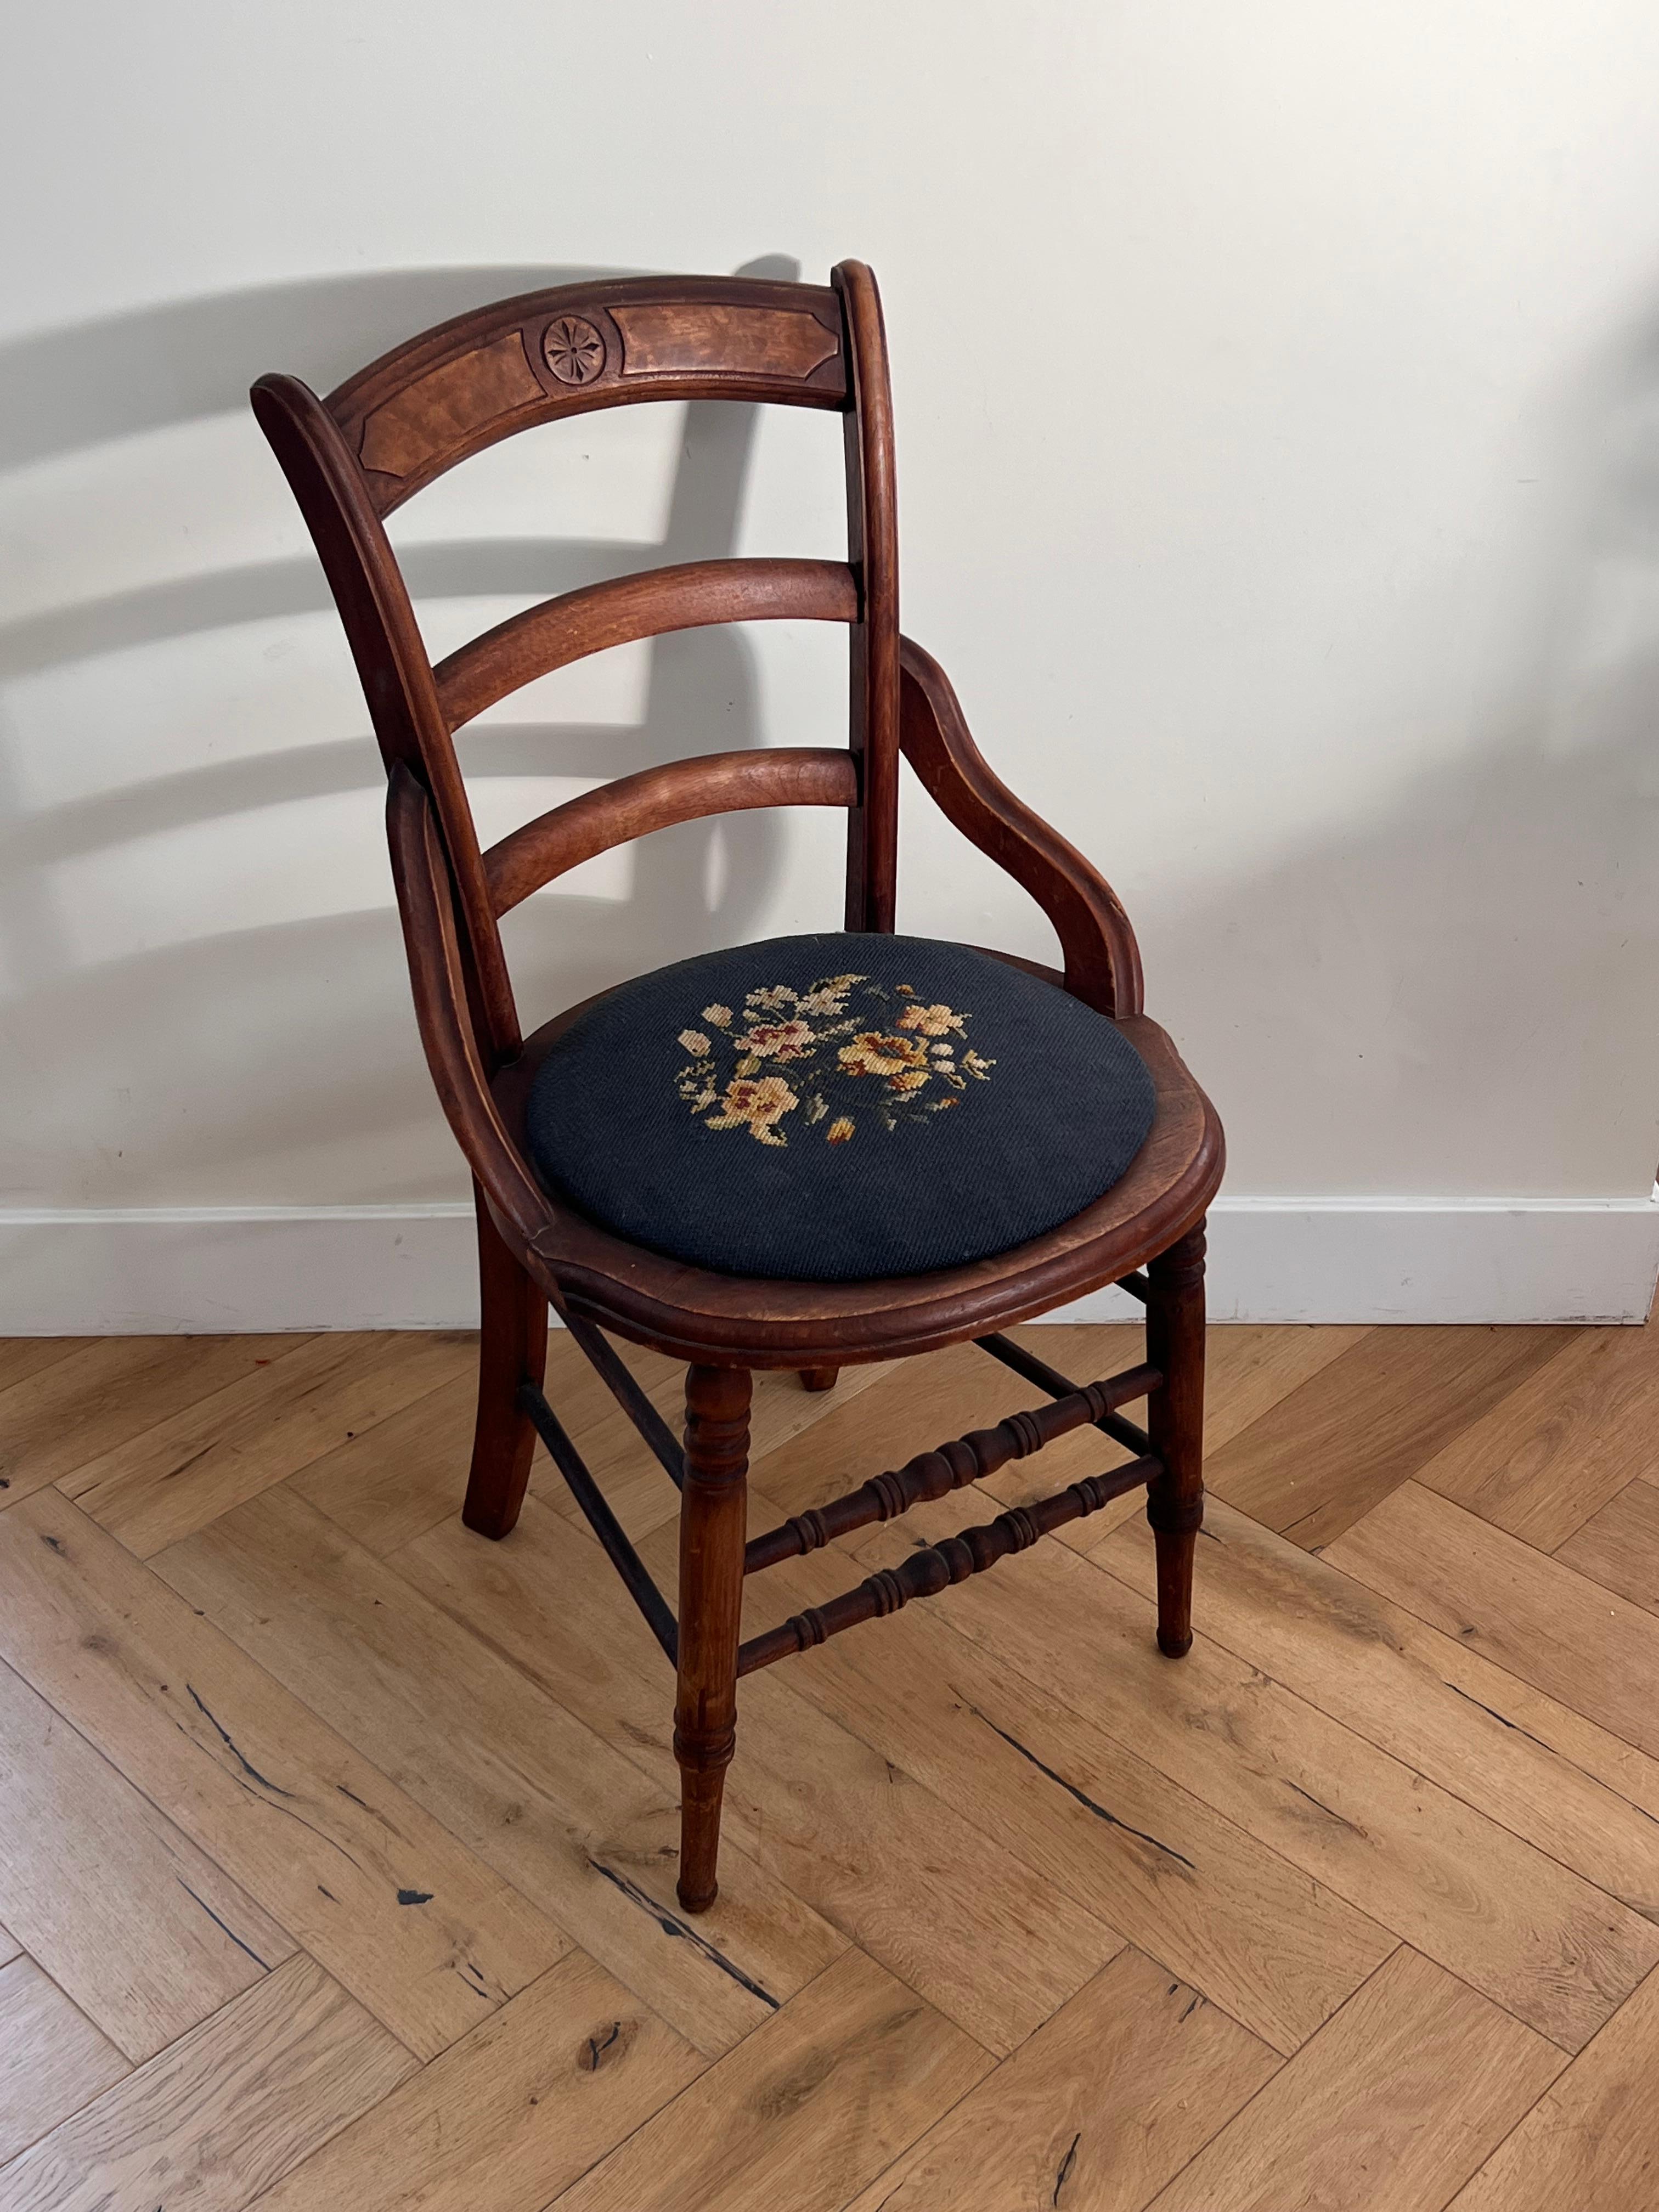 Antique Wooden Chair with Embroidered Needlepoint Seat, Early 20th Century For Sale 4